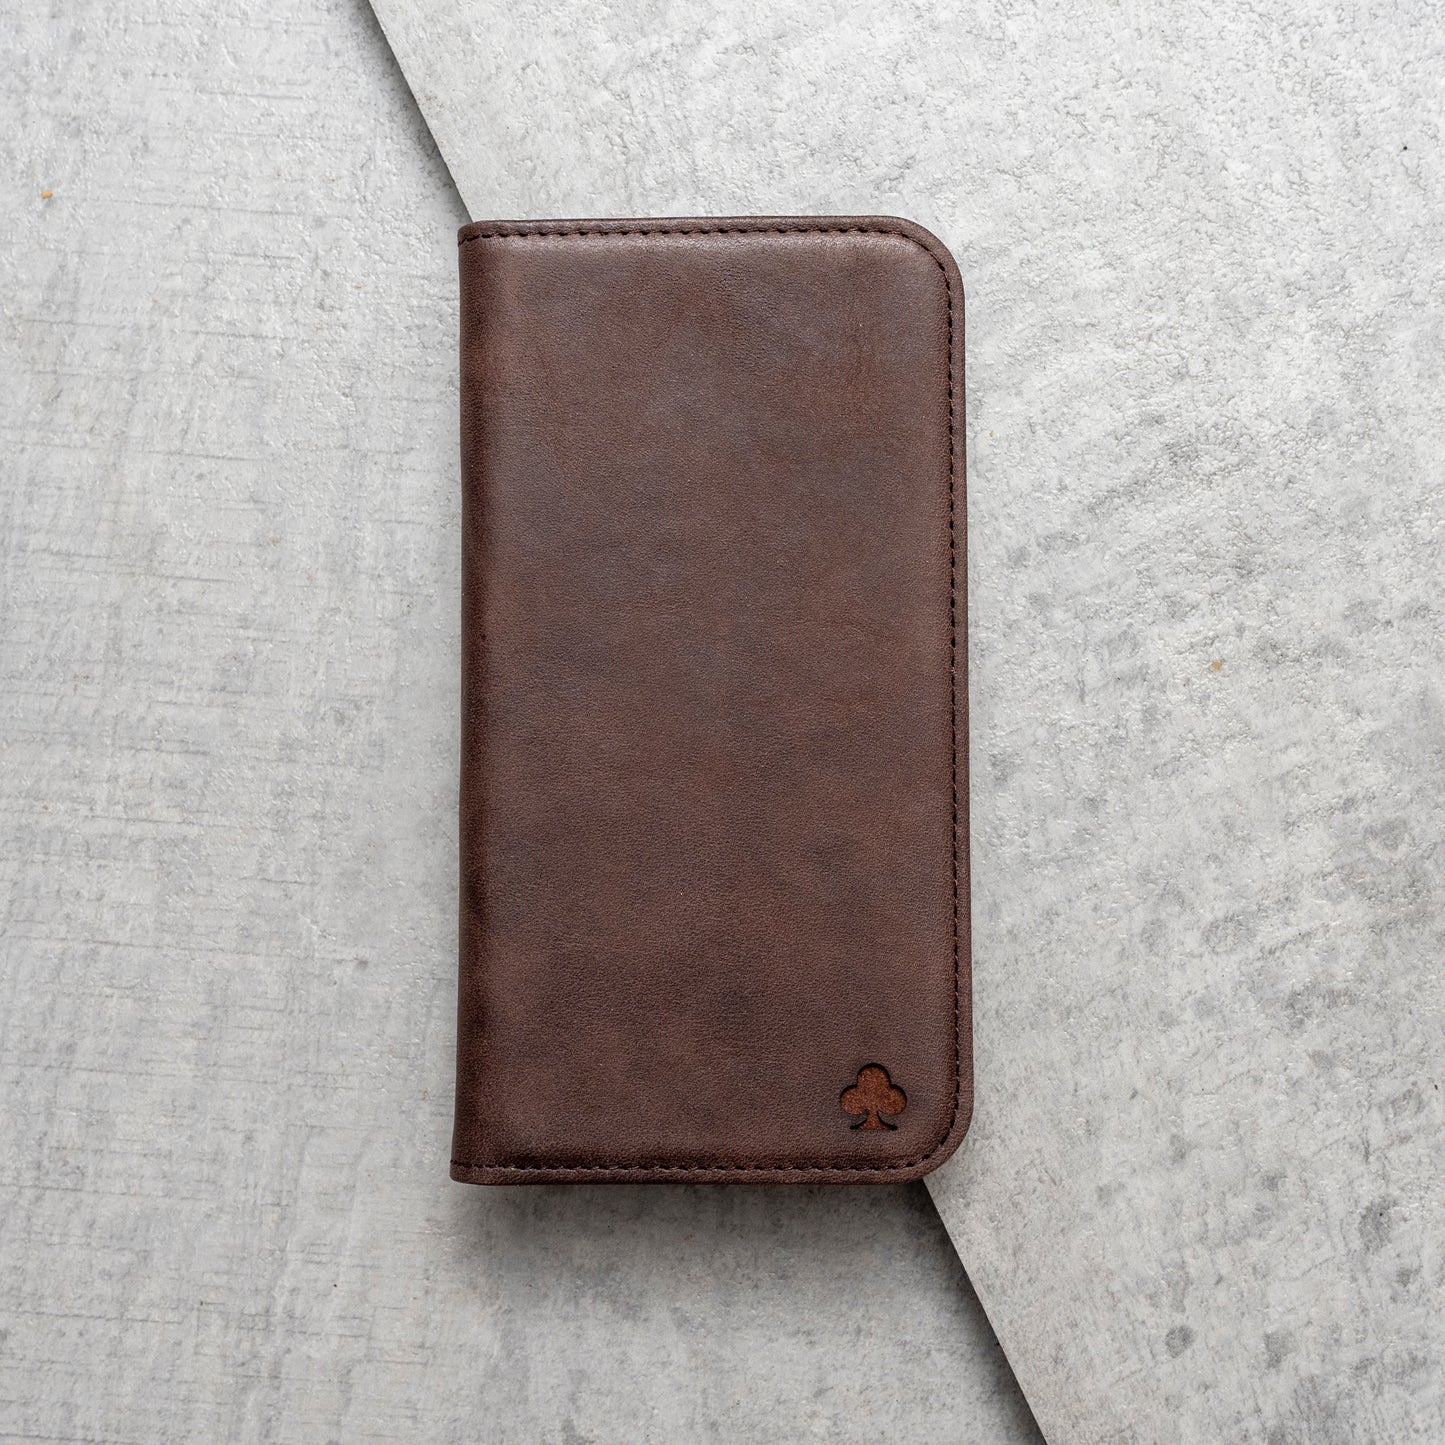 iPhone 11 Pro Max Leather Case. Premium Slim Genuine Leather Stand Case/Cover/Wallet (Chocolate Brown)